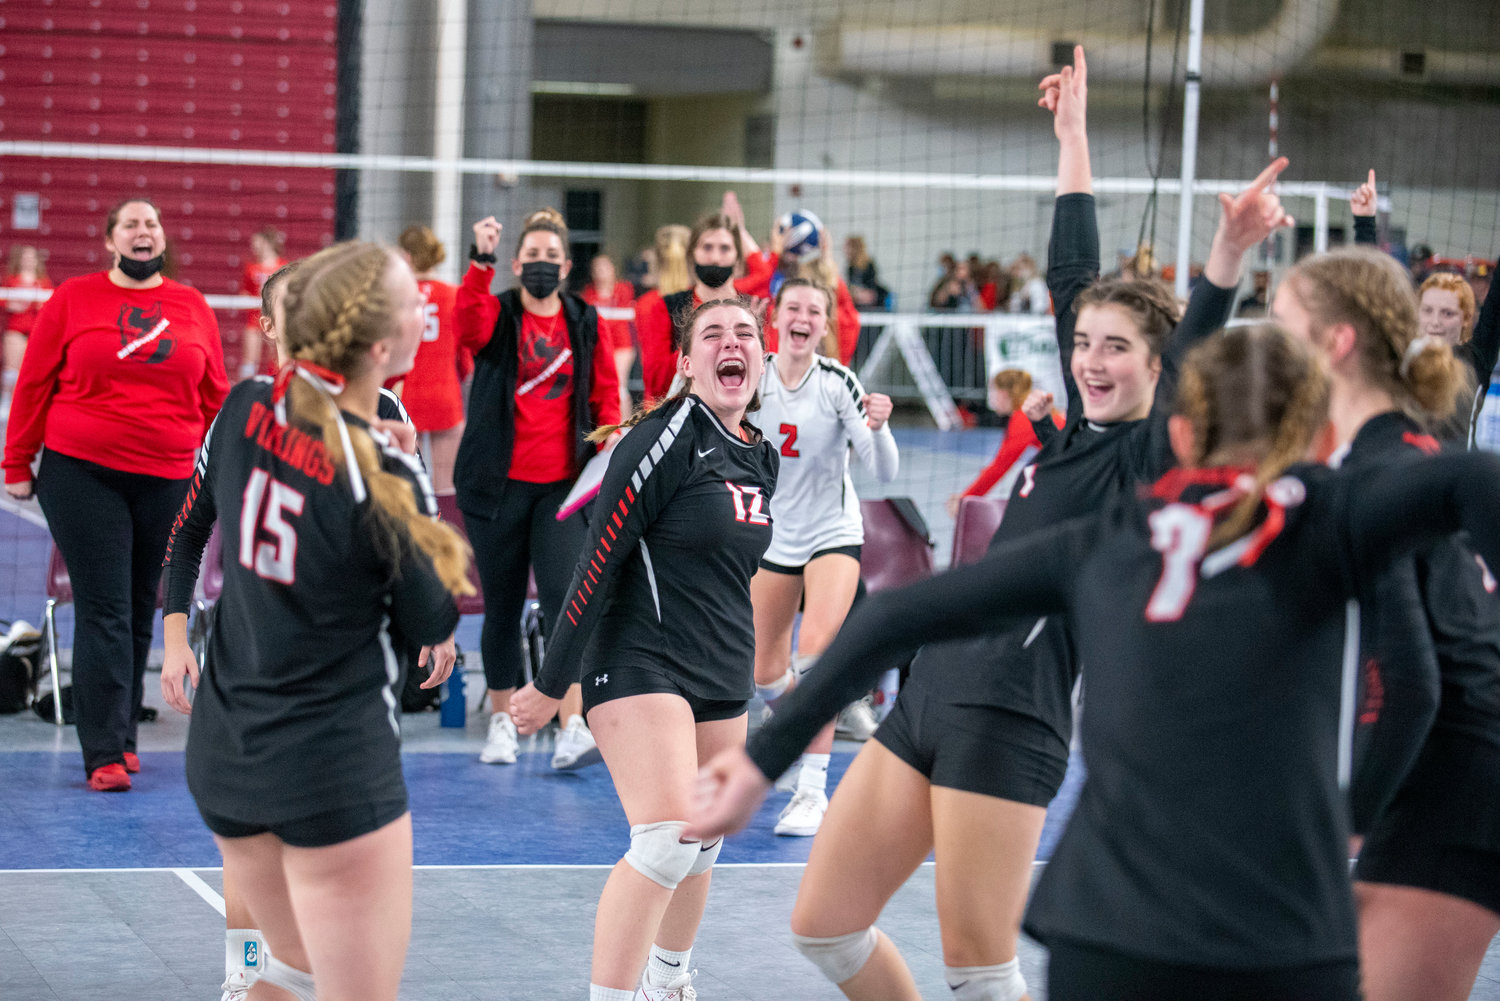 Mossyrock celebrates after scoring against Oakesdale during the 1B state championship match Friday in Yakima.